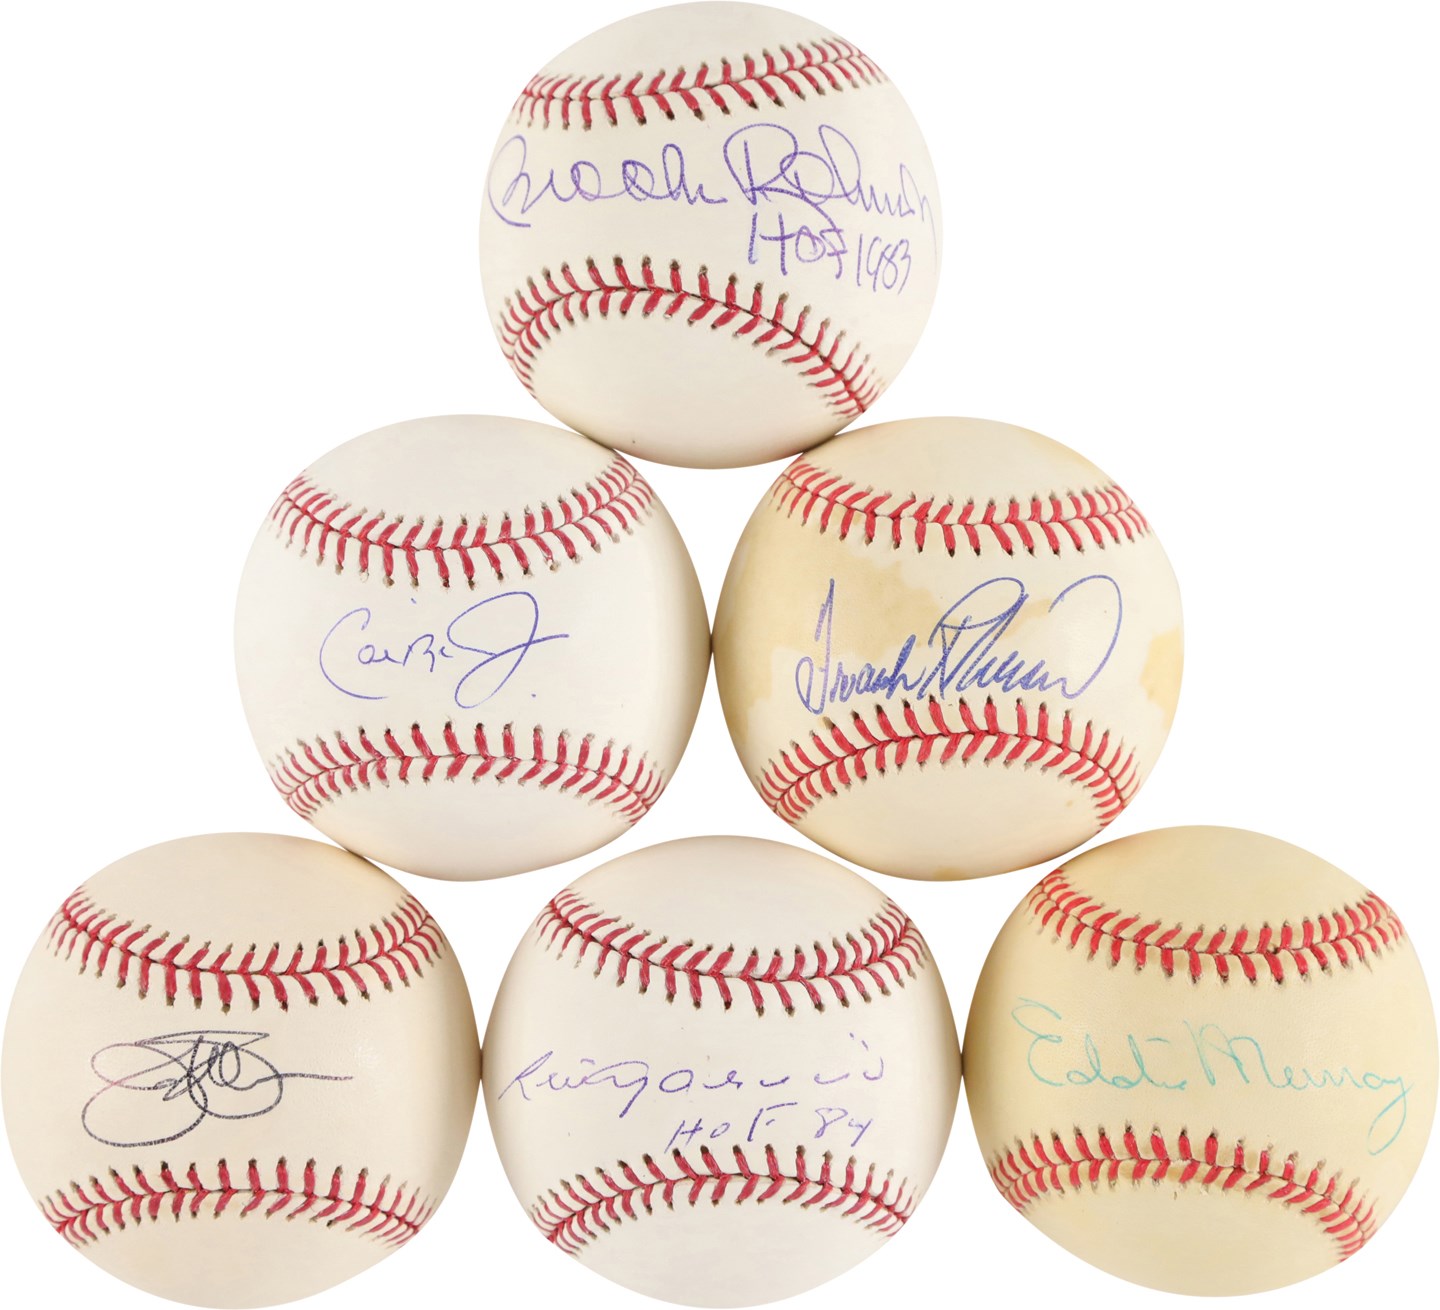 Baseball Autographs - Baltimore Orioles Hall of Famers & Stars Signed Baseball Collection (45)